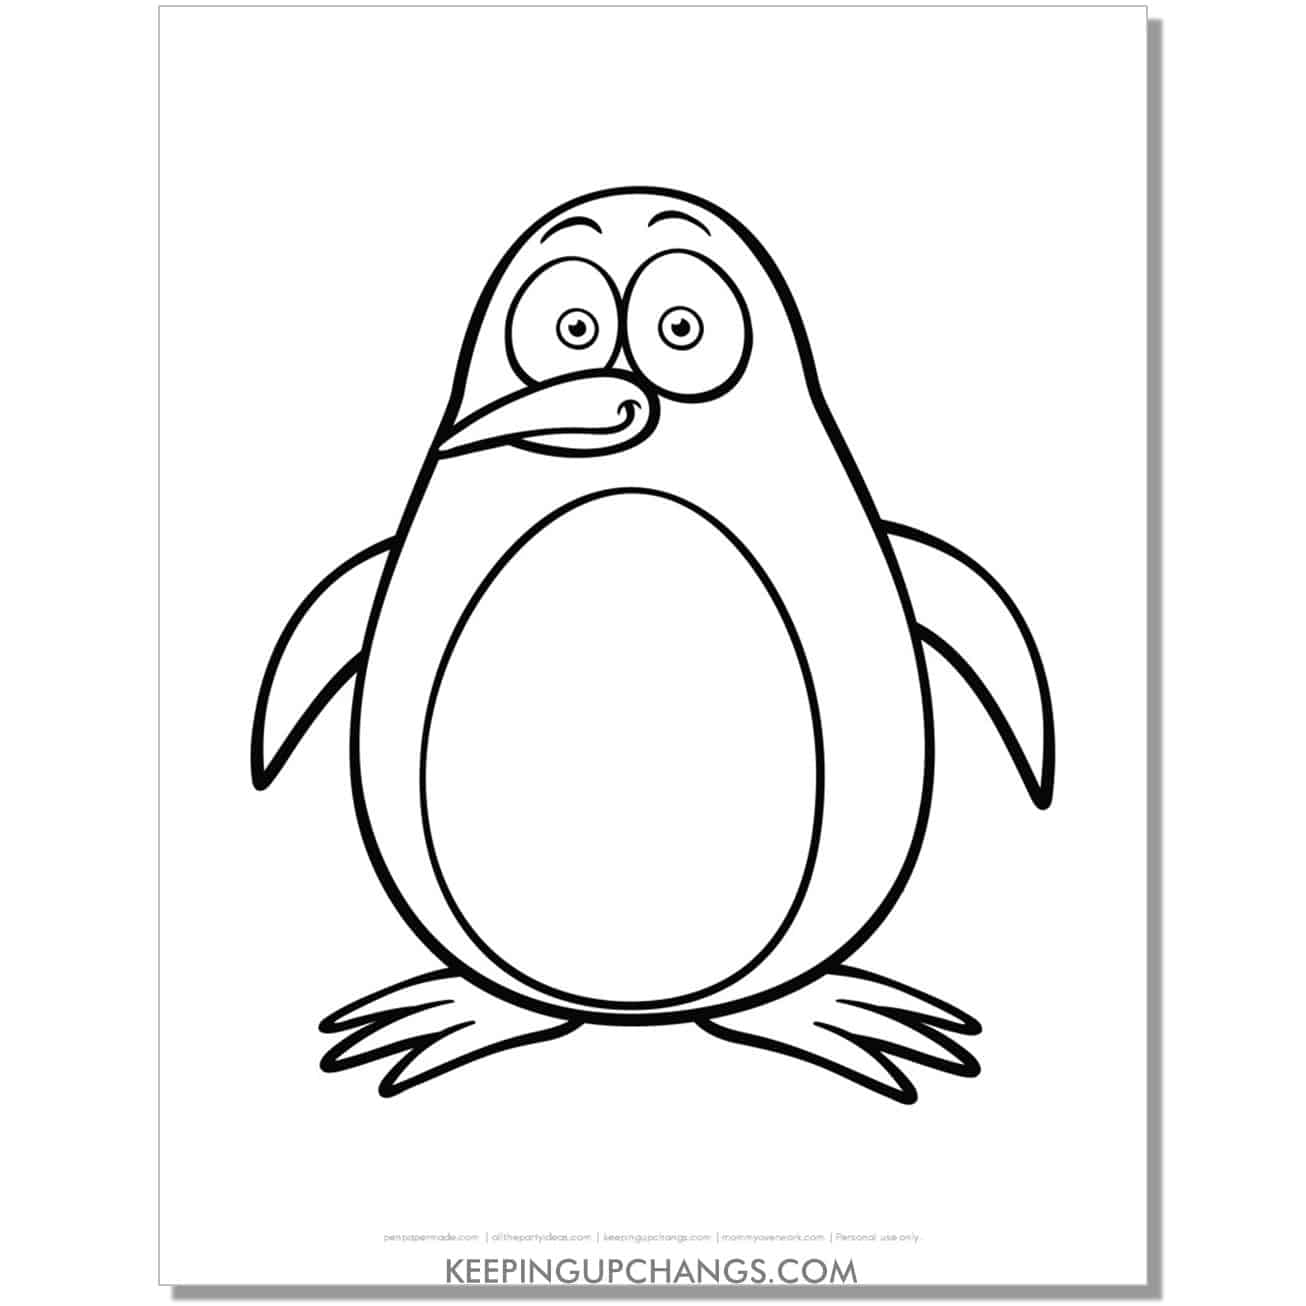 free funny penguin with avocado shaped body coloring page.